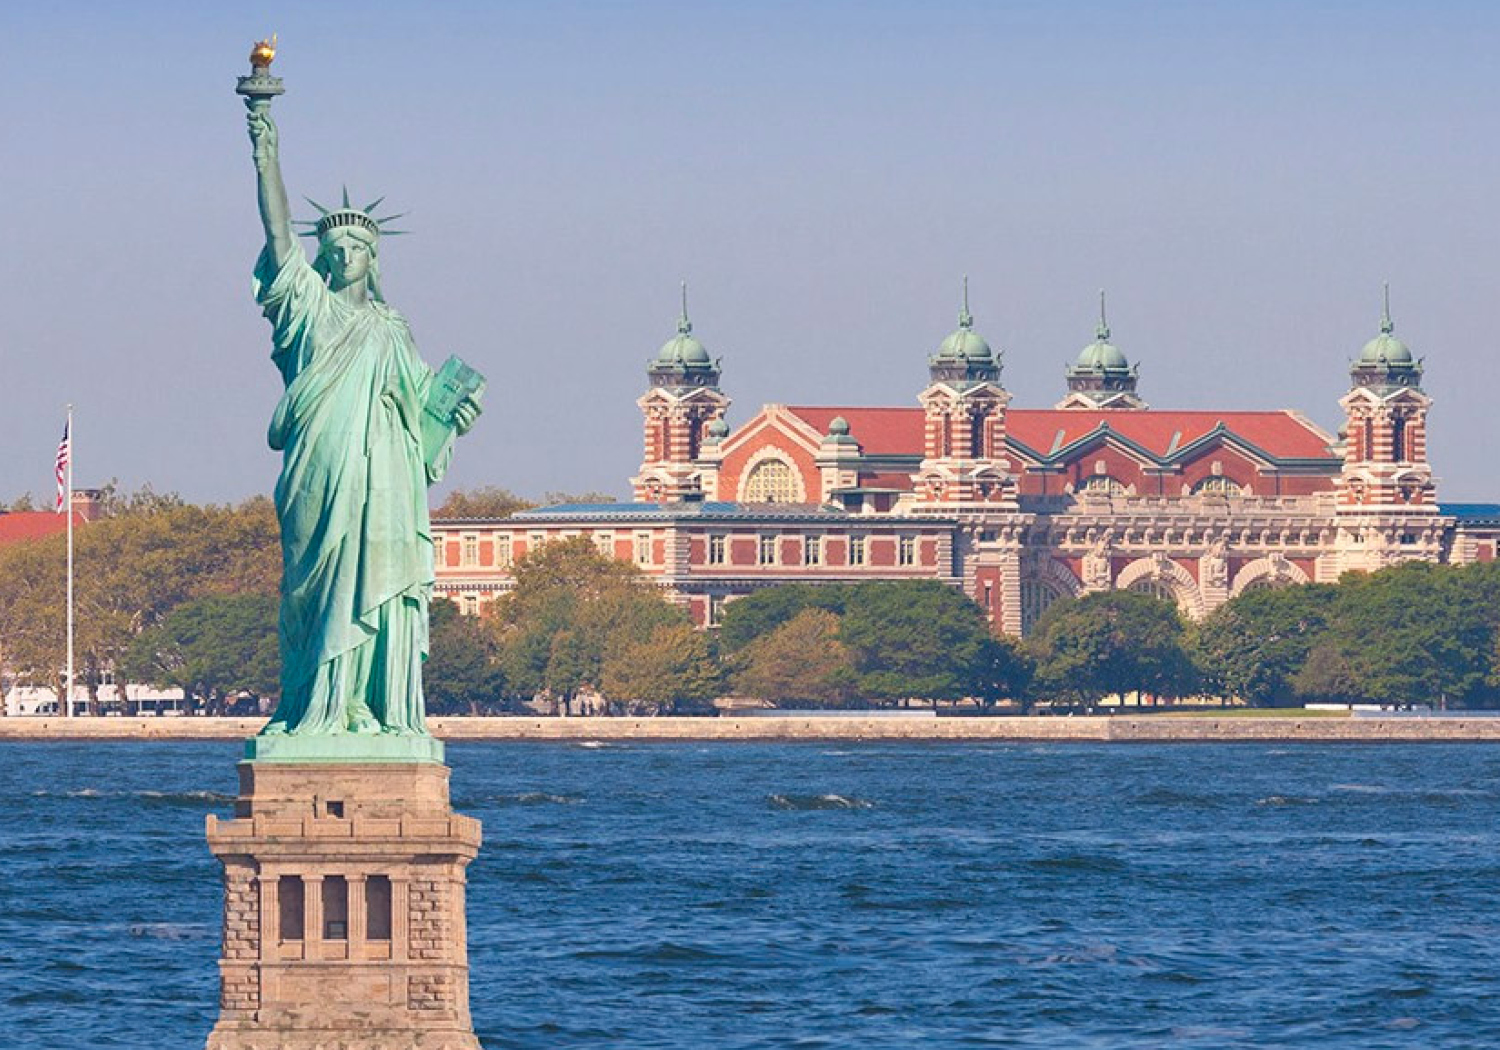 cost to visit statue of liberty and ellis island